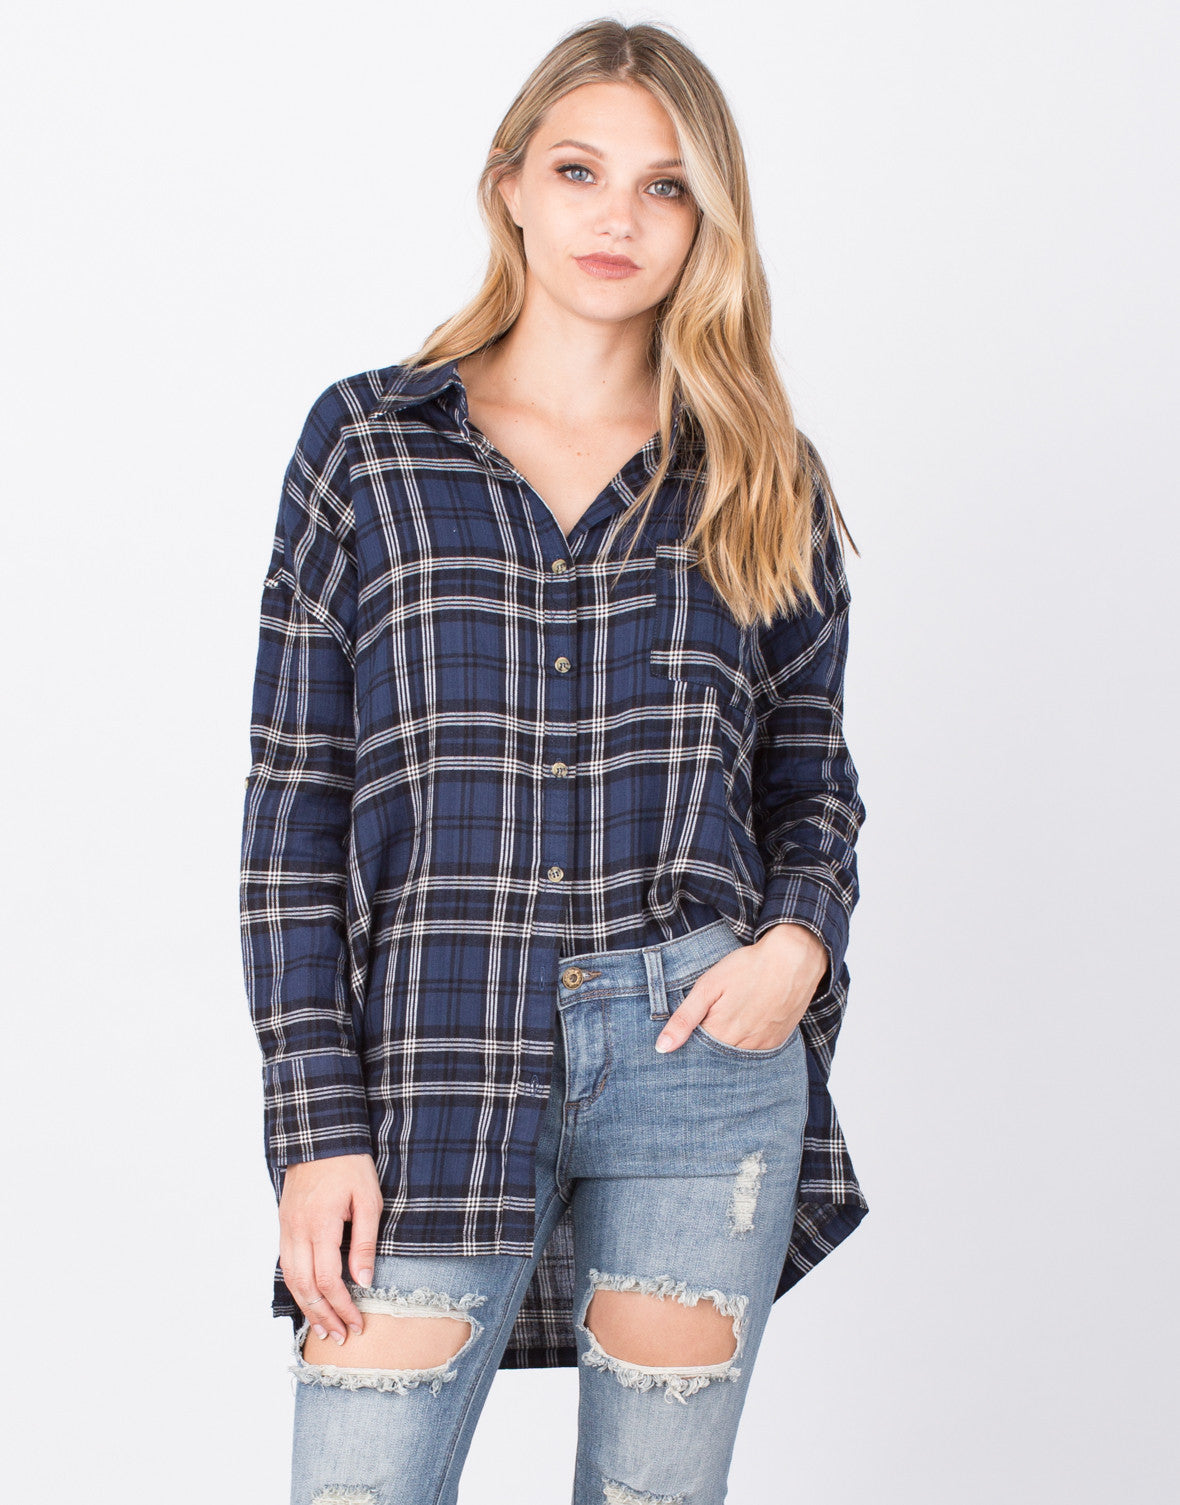 Mad for Plaid Tunic Top - Lightweight Plaid Top - Long Sleeve Shirt ...